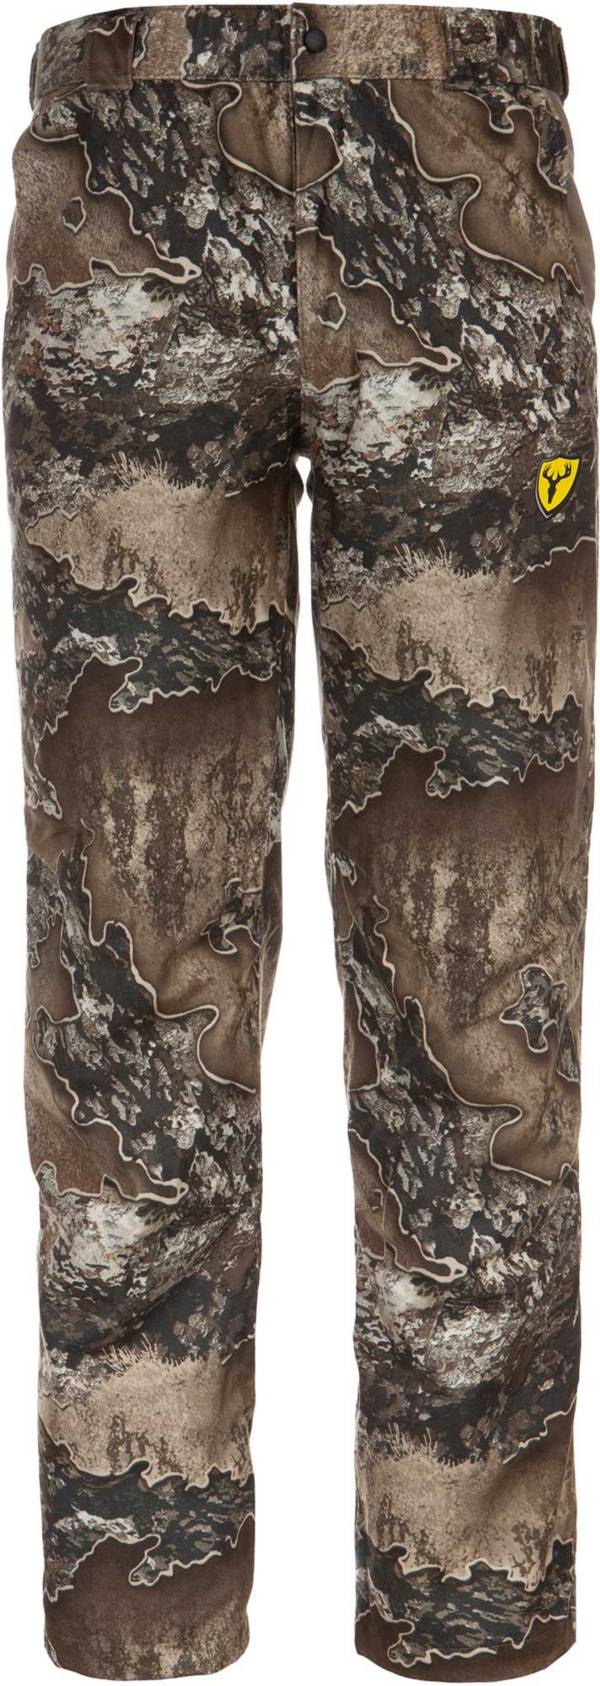 Blocker Outdoors Men's Drencher Insulated Pants product image